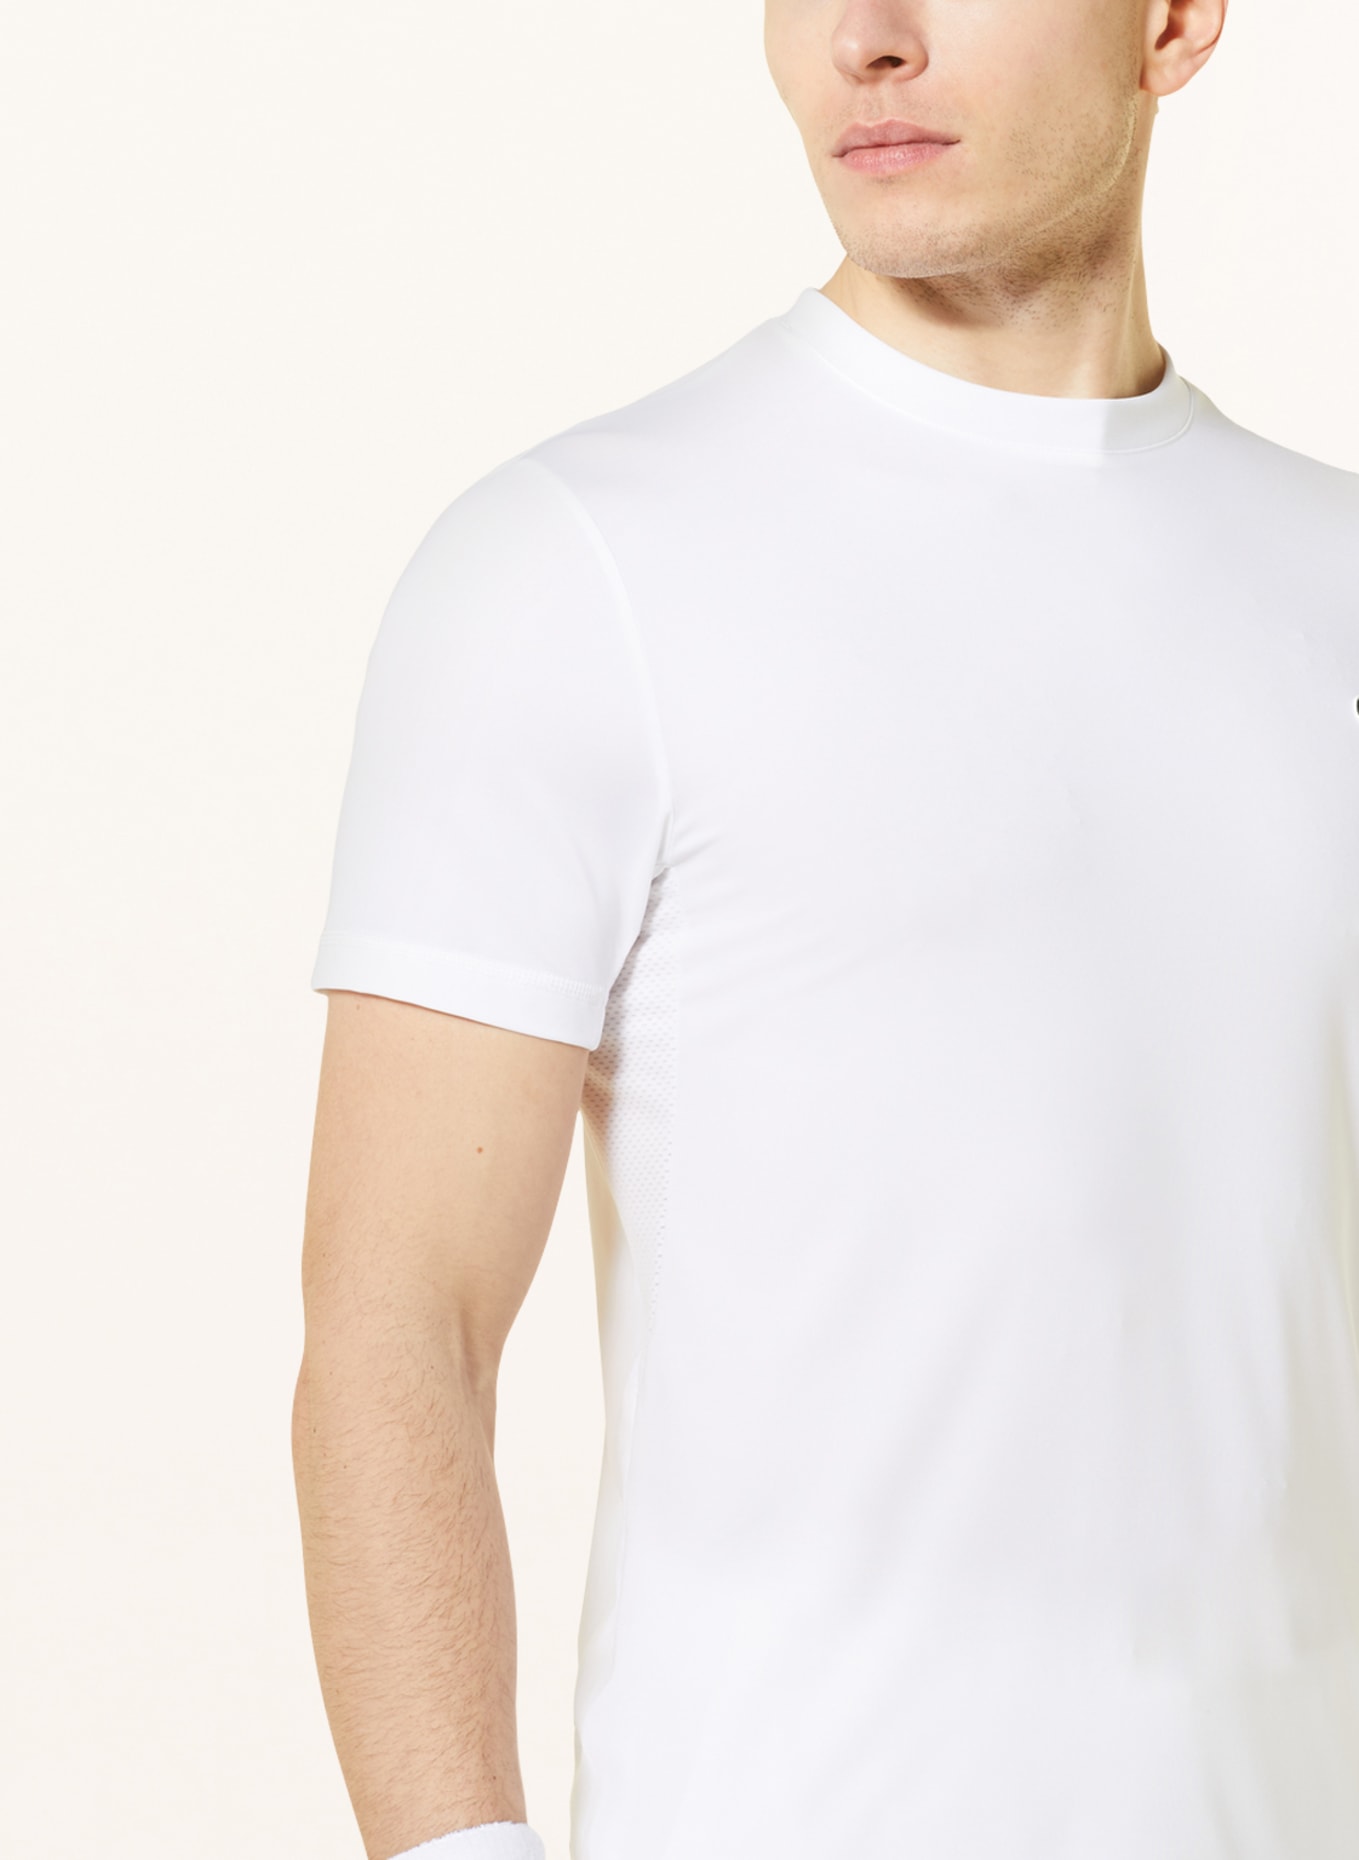 LACOSTE T-Shirt weiss in mit Mesh